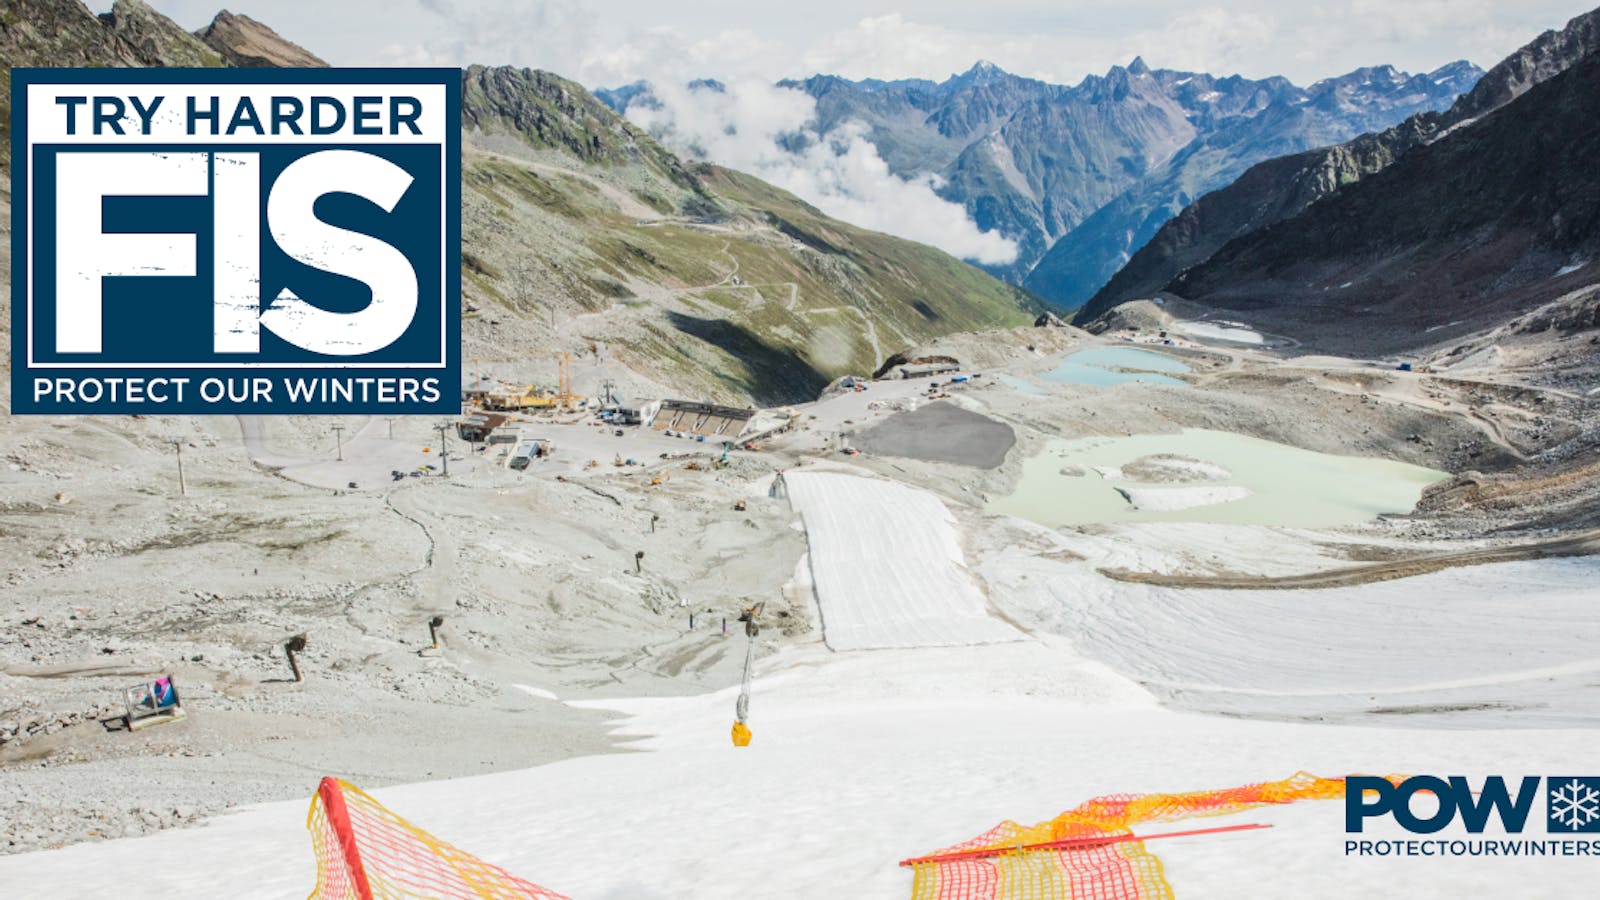 POW calls for more sustainability at FIS - what does it mean?